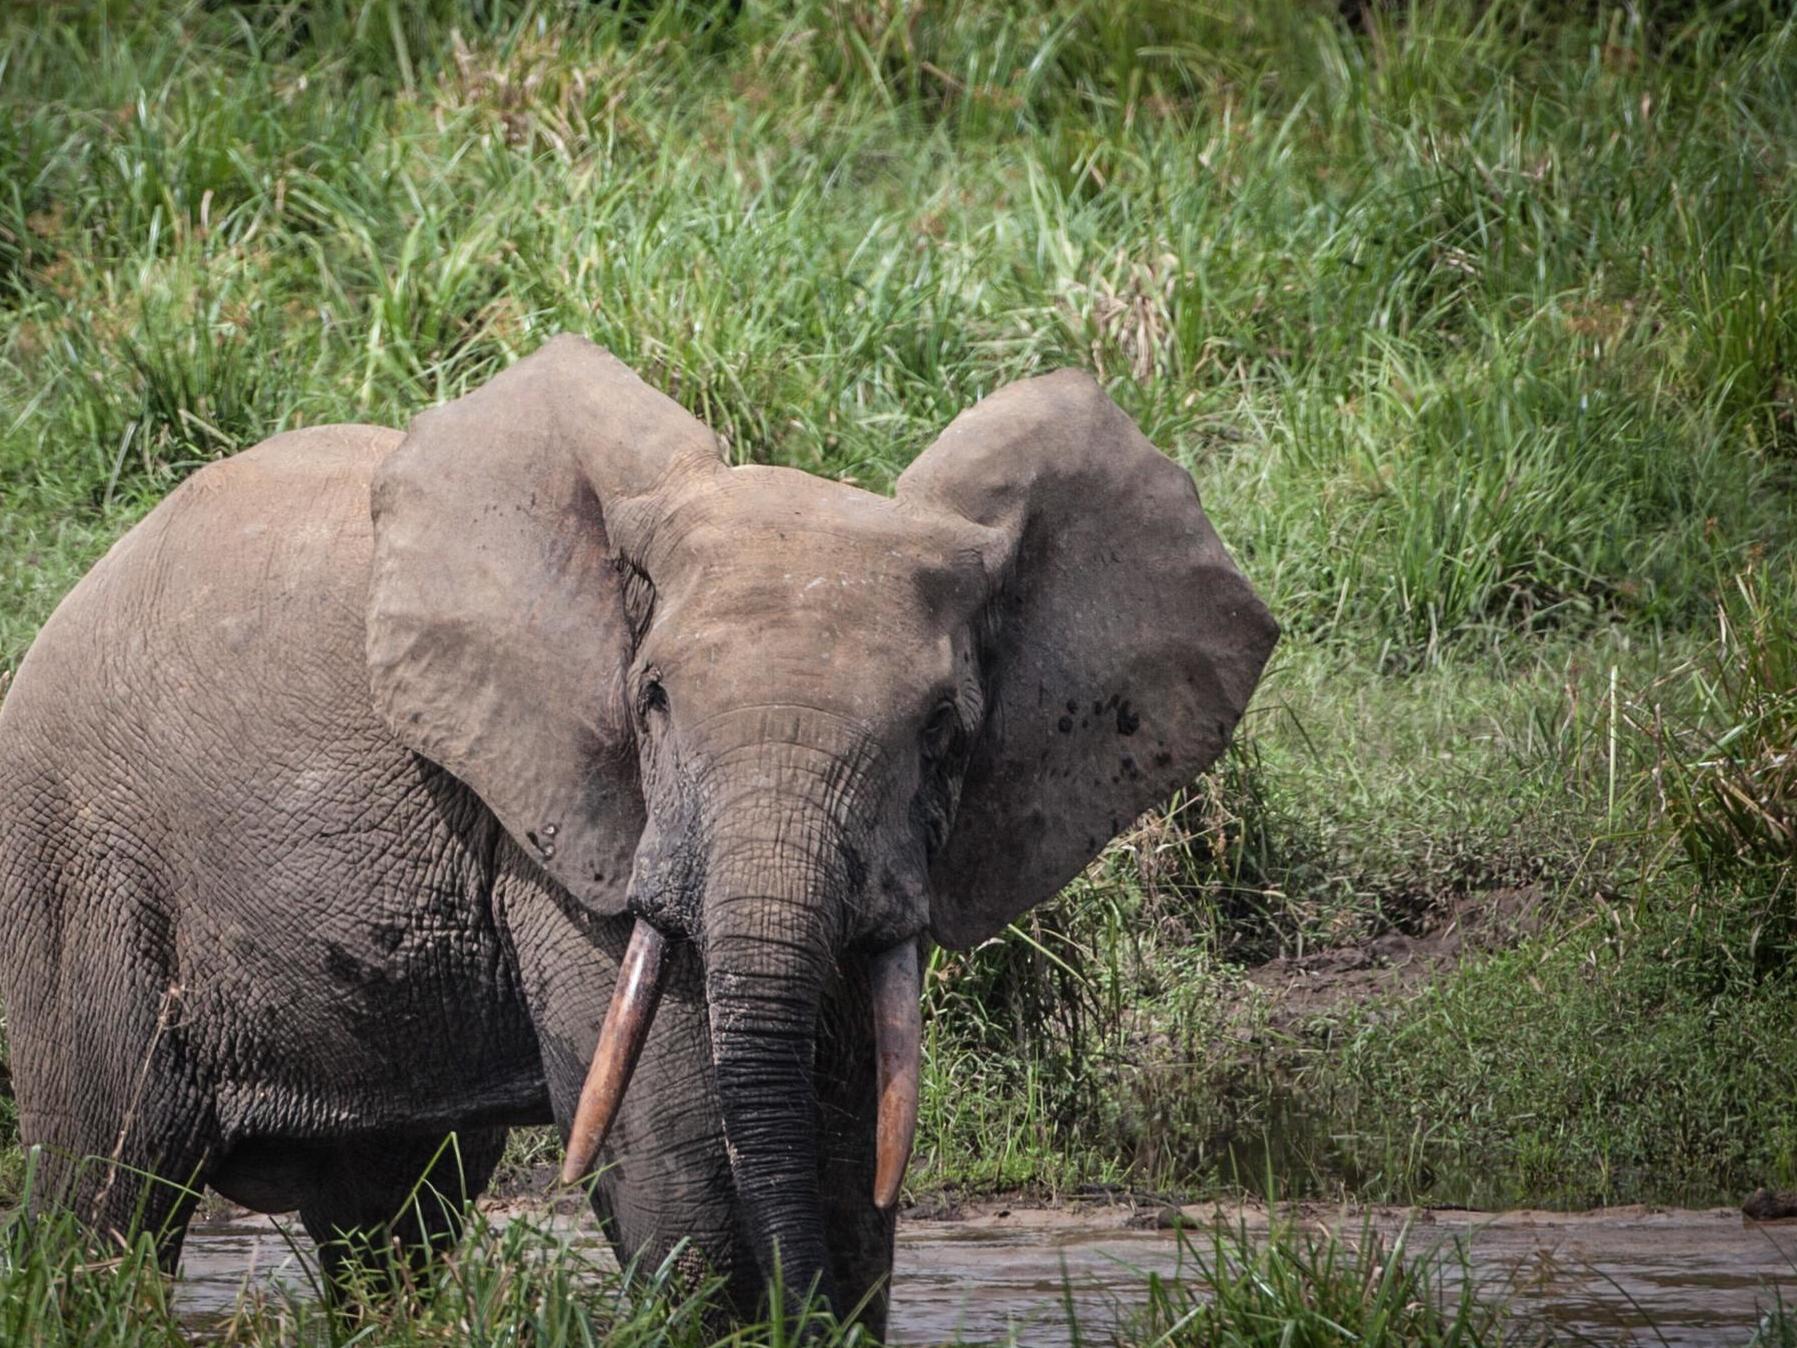 The poaching of forest elephants has recently spread to Gabon, which holds half of the world's population of the species